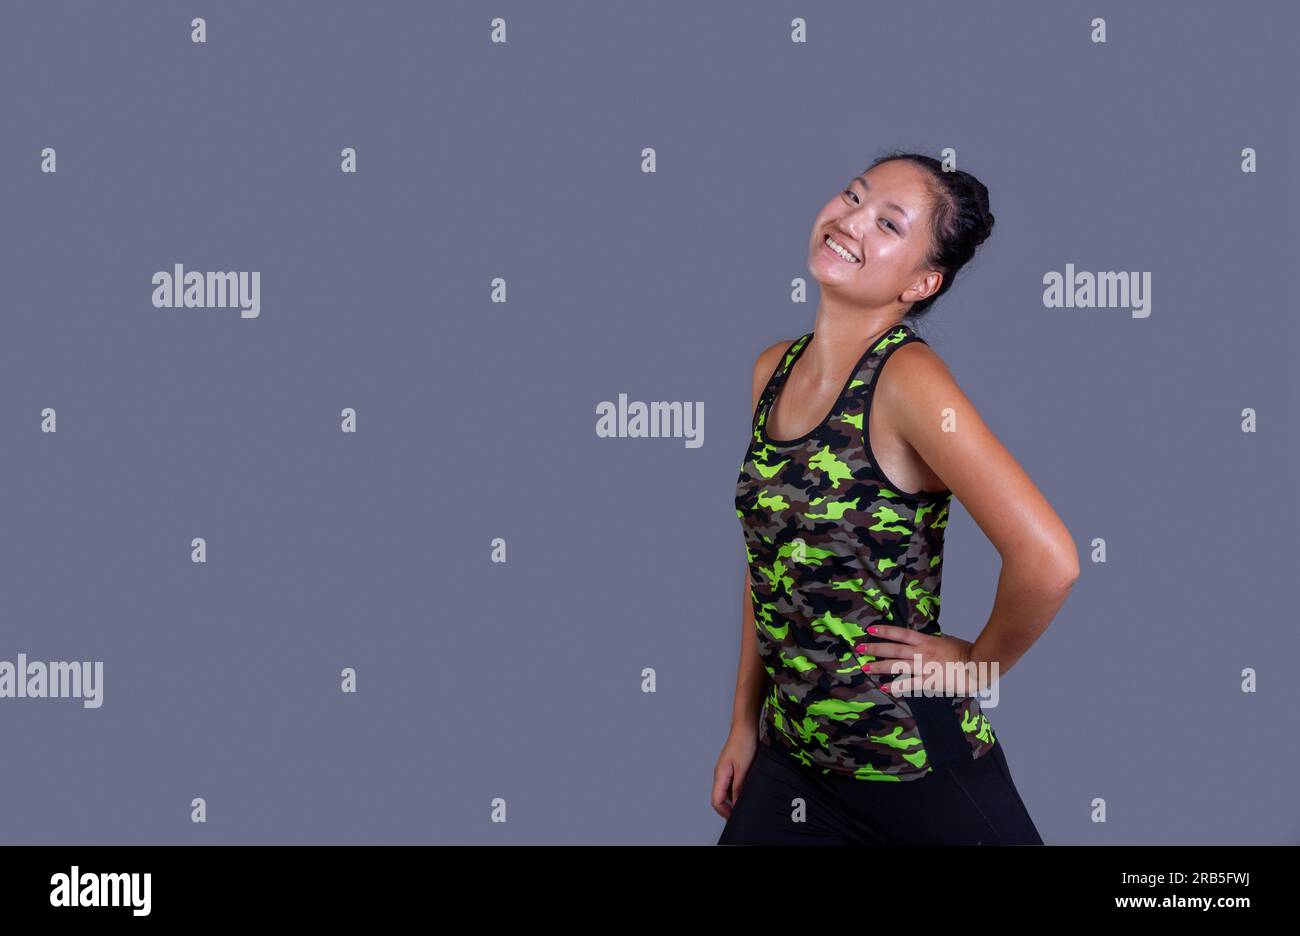 young chinese woman posing in sportswear on gray background Stock Photo